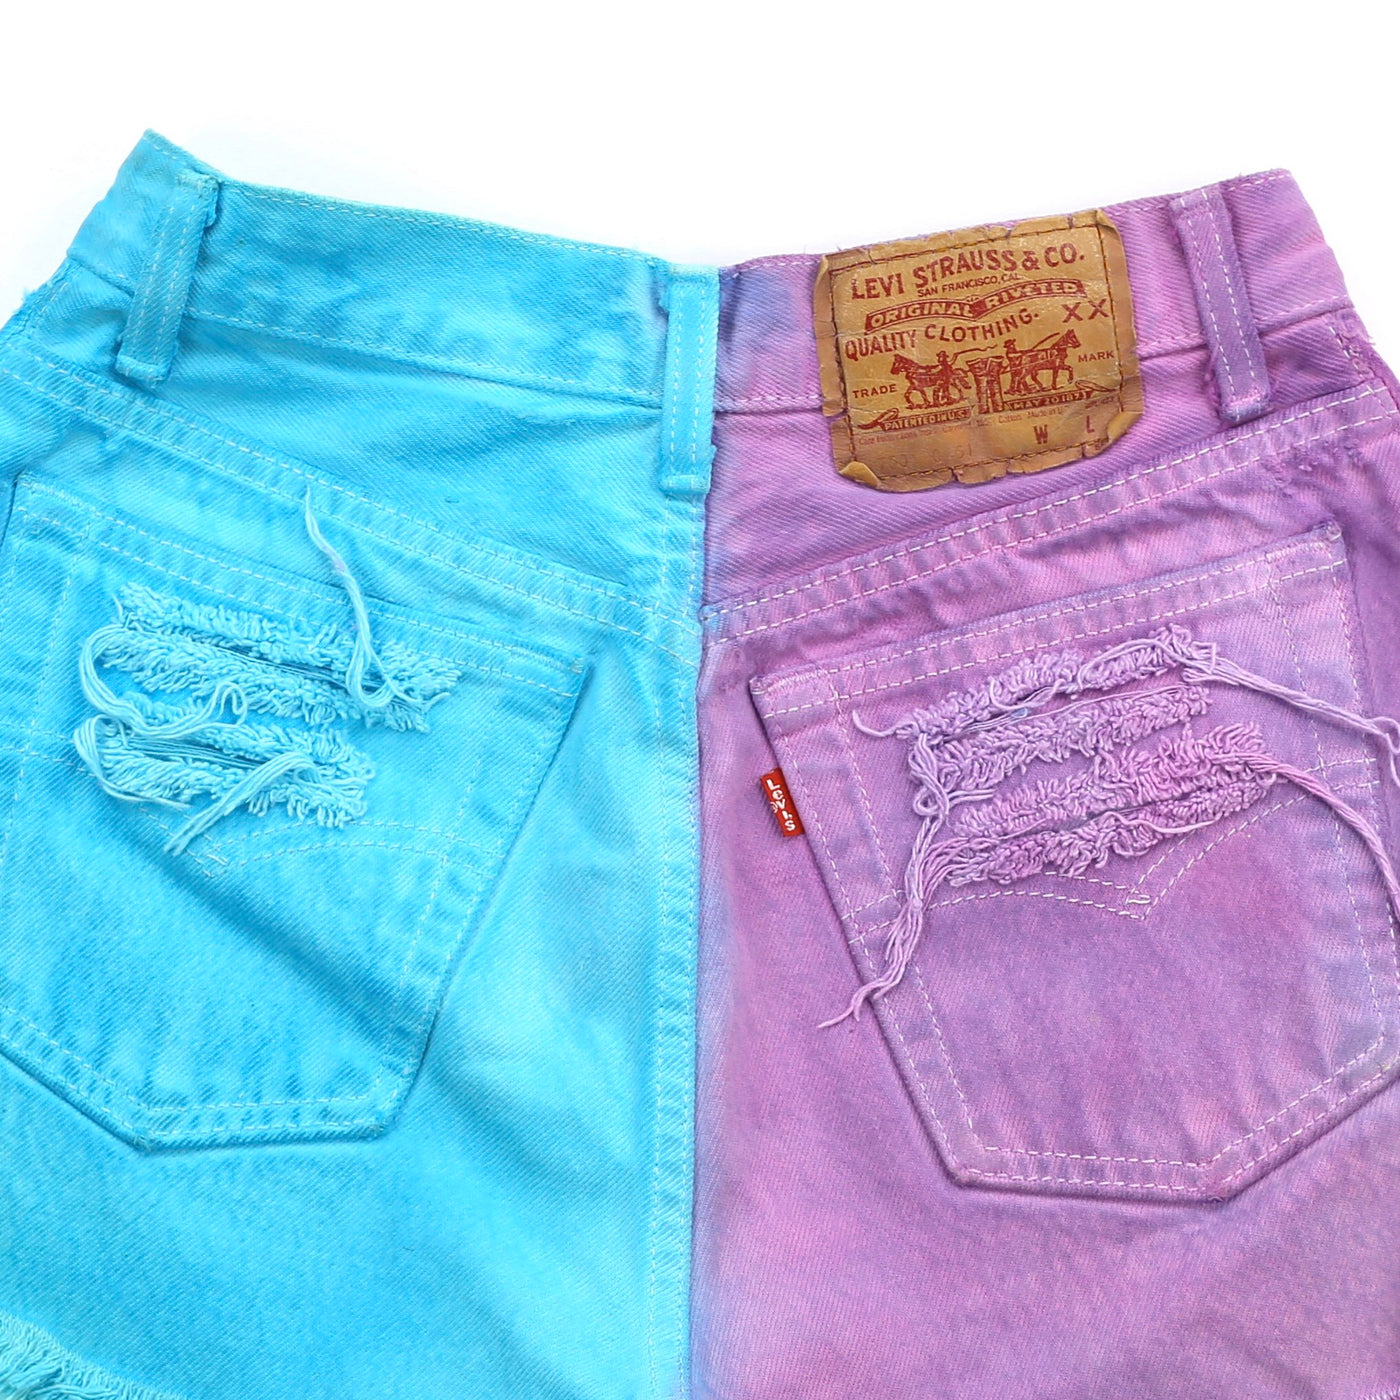 Vintage 501 Levis Half Dyed Purple Studded and Distressed High Waisted Shorts // Size 25 // Festival Outfits